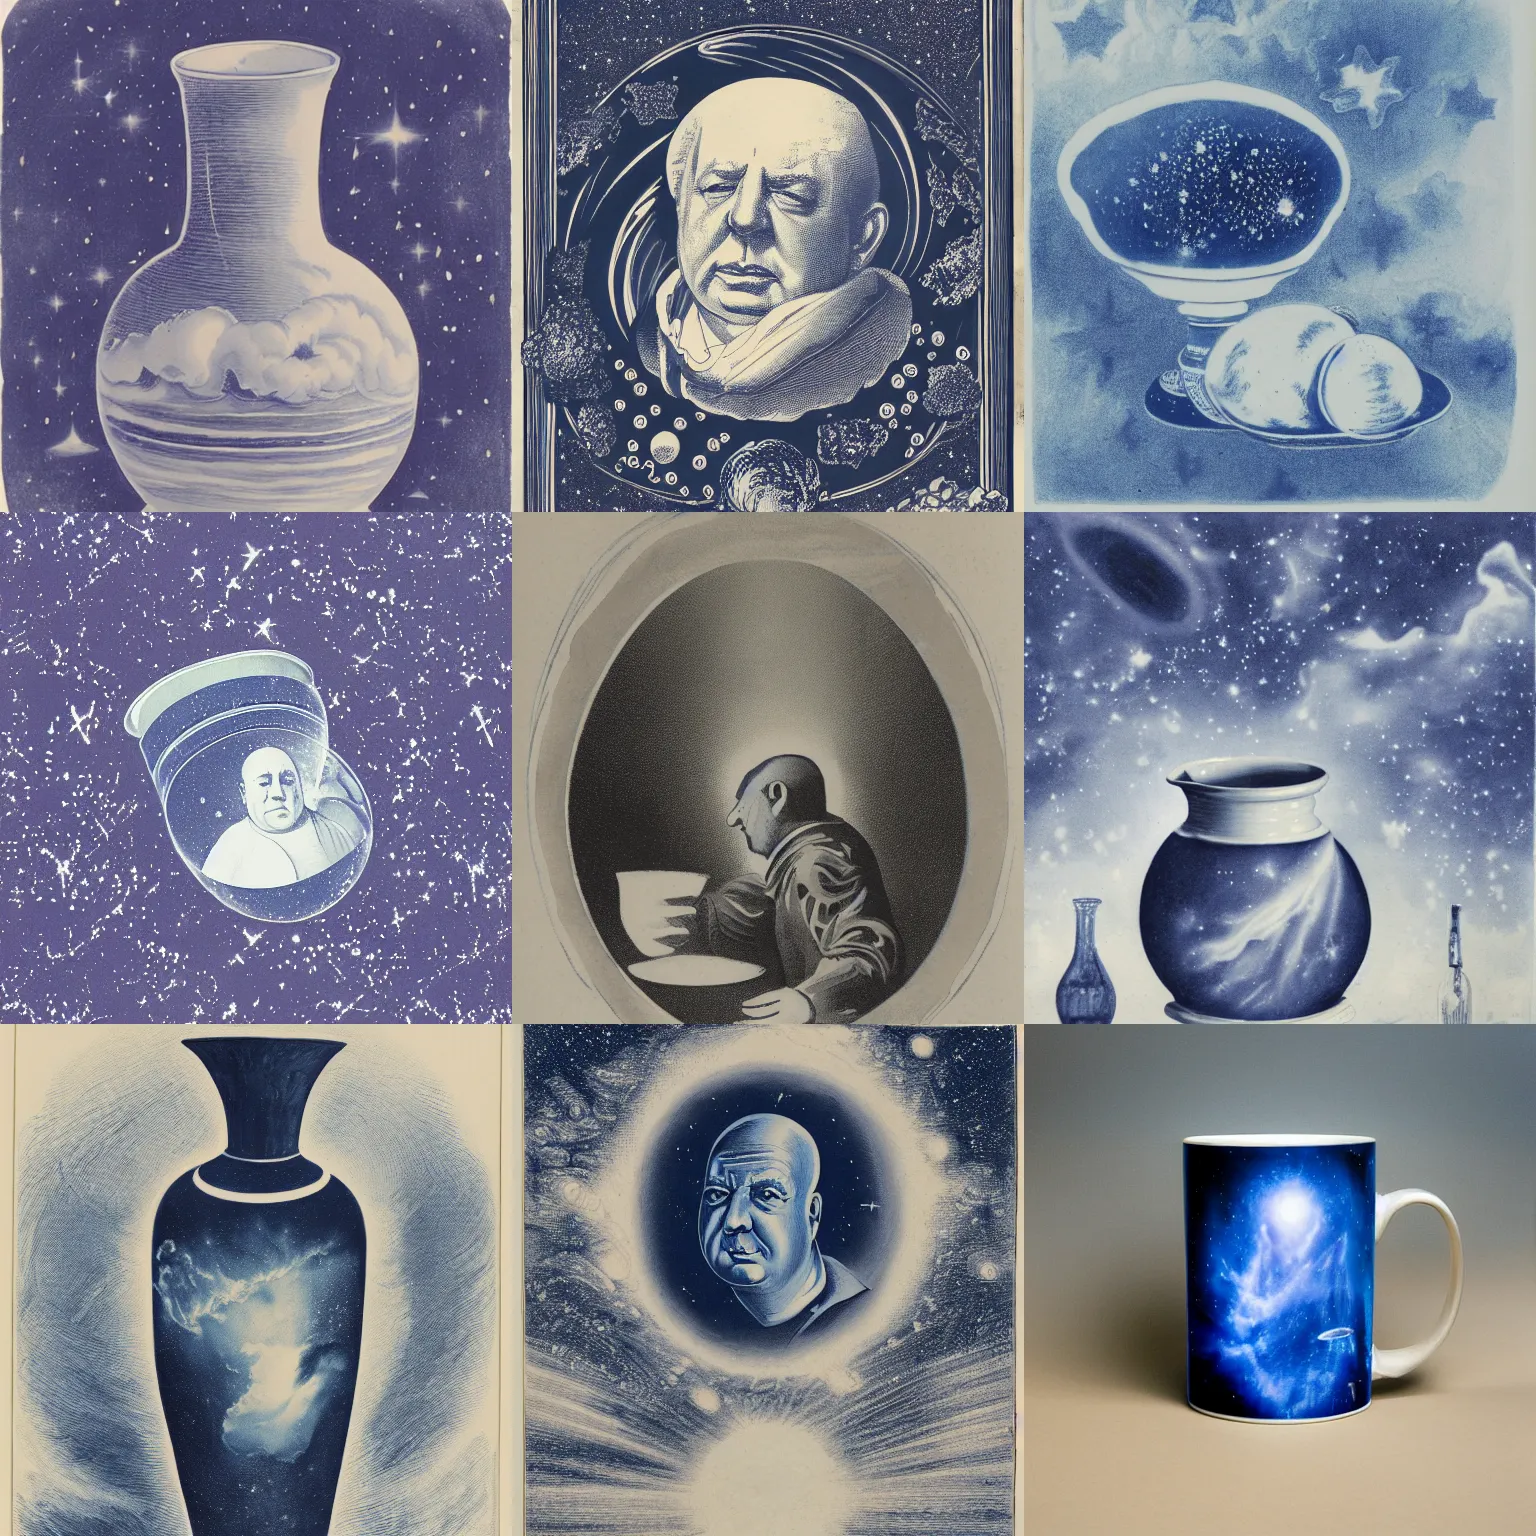 Prompt: blue and white clean star nebulae illustration with alfred hitchcock gazing into the far distance, etched unto a porcelain jug